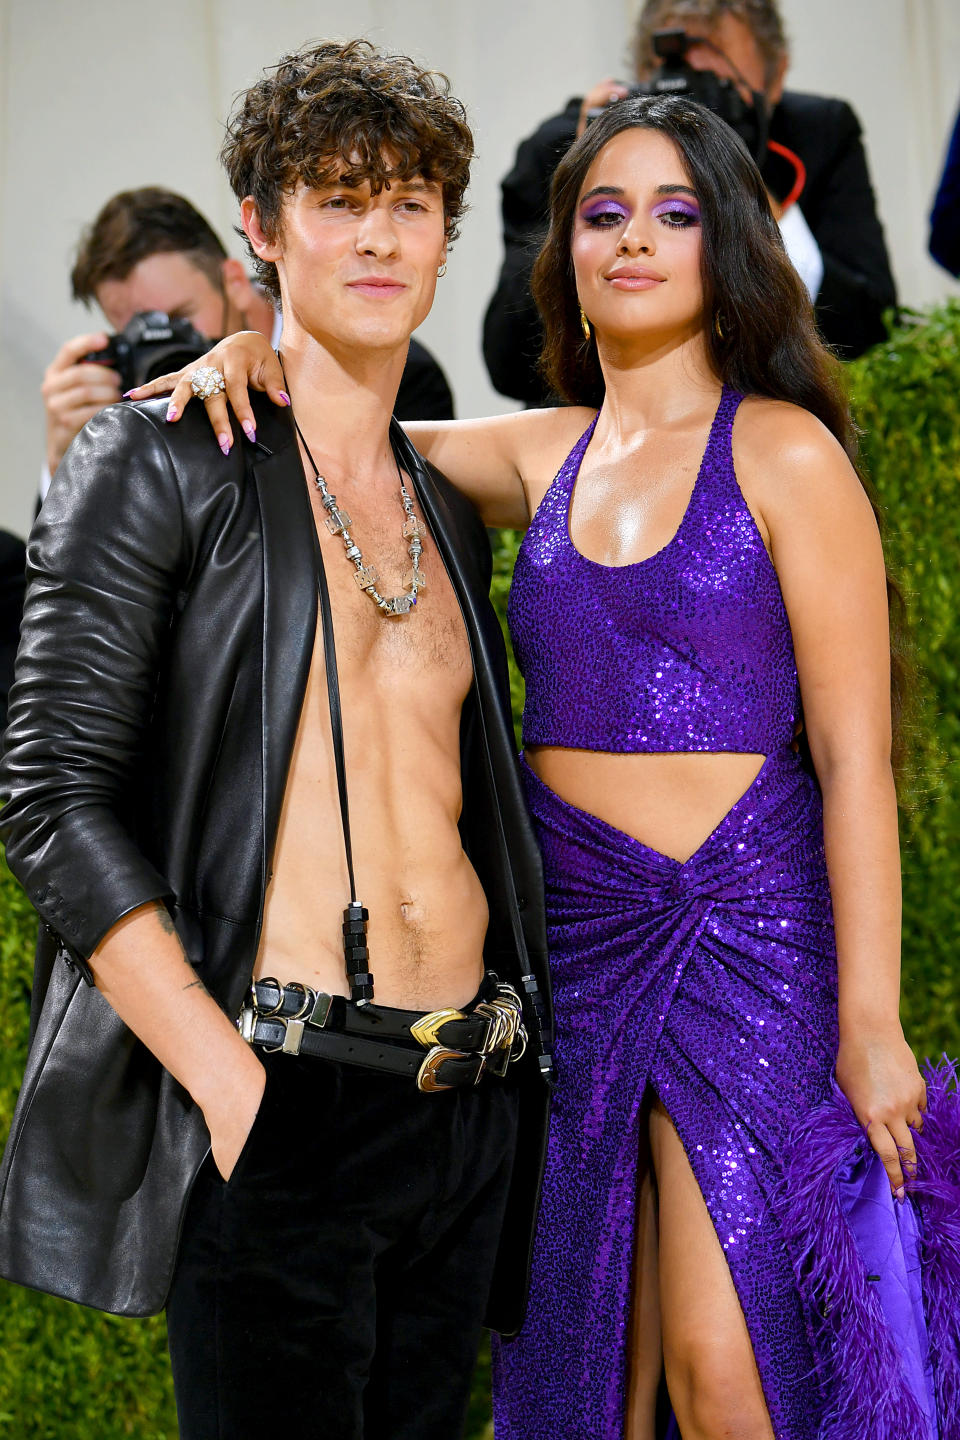 Man in leather jacket and necklaces; woman in purple sequined dress with slit. Both posing on event carpet